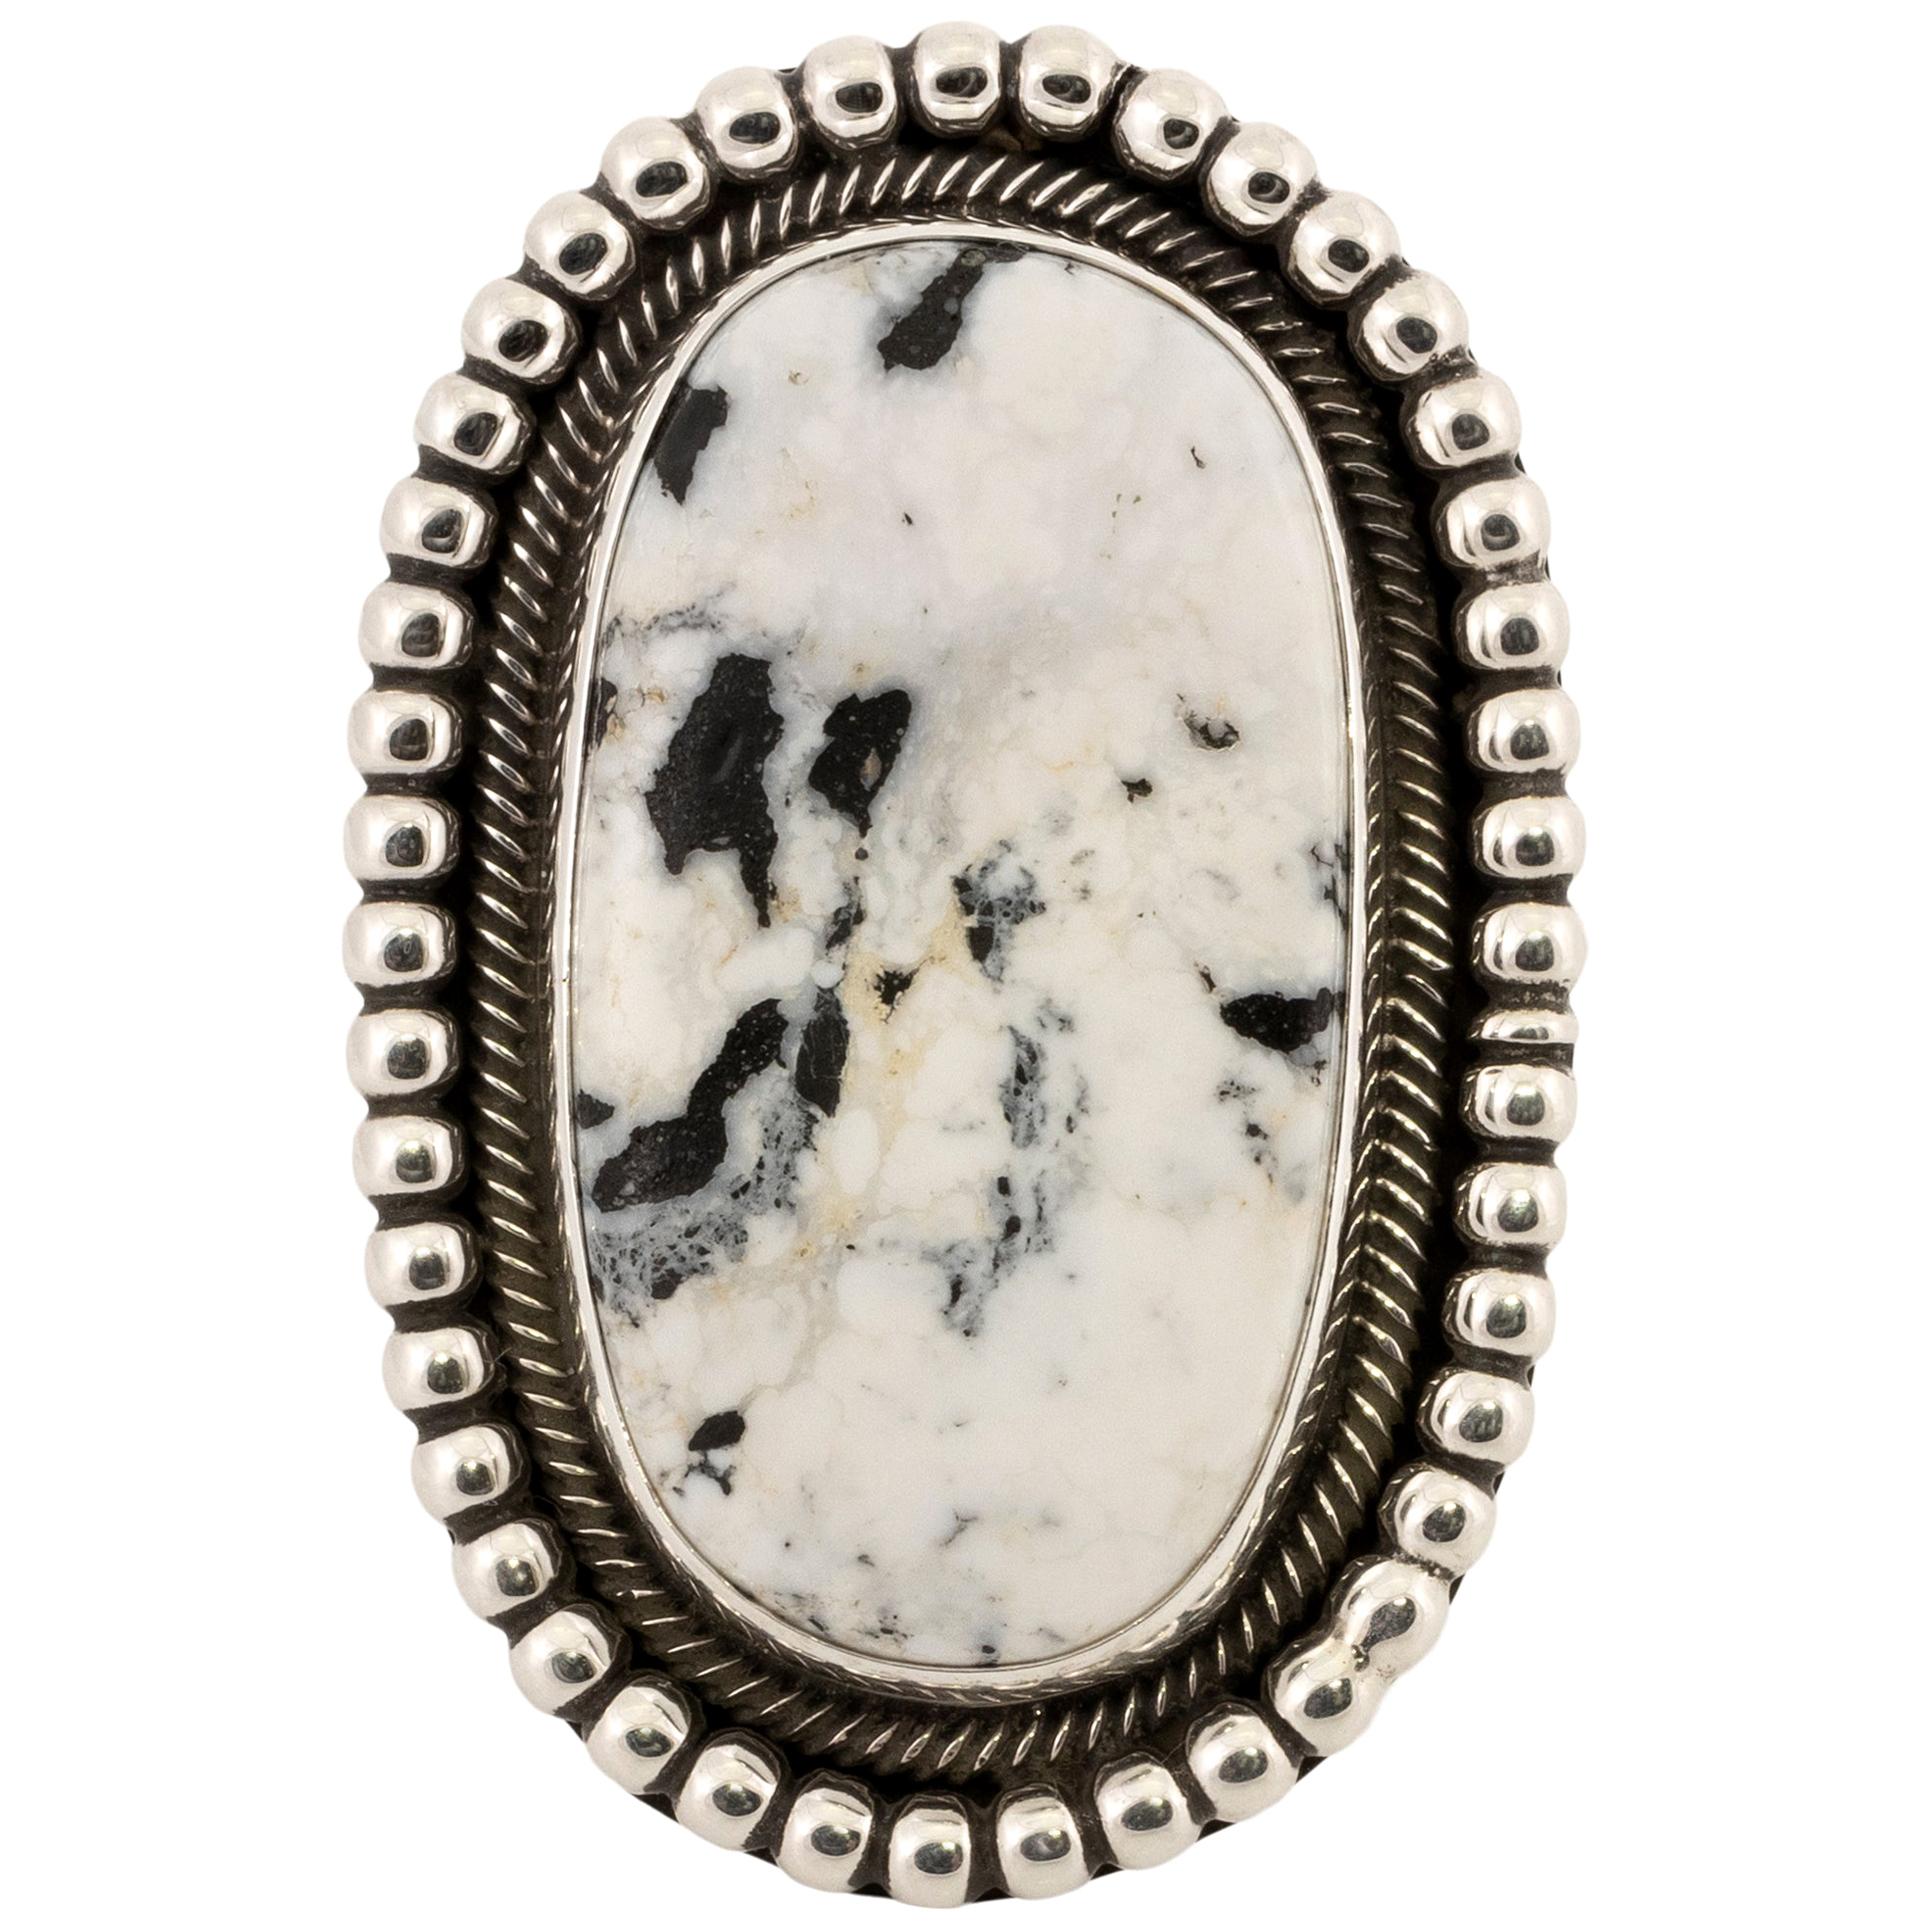 White Buffalo Turquoise and Sterling Ring